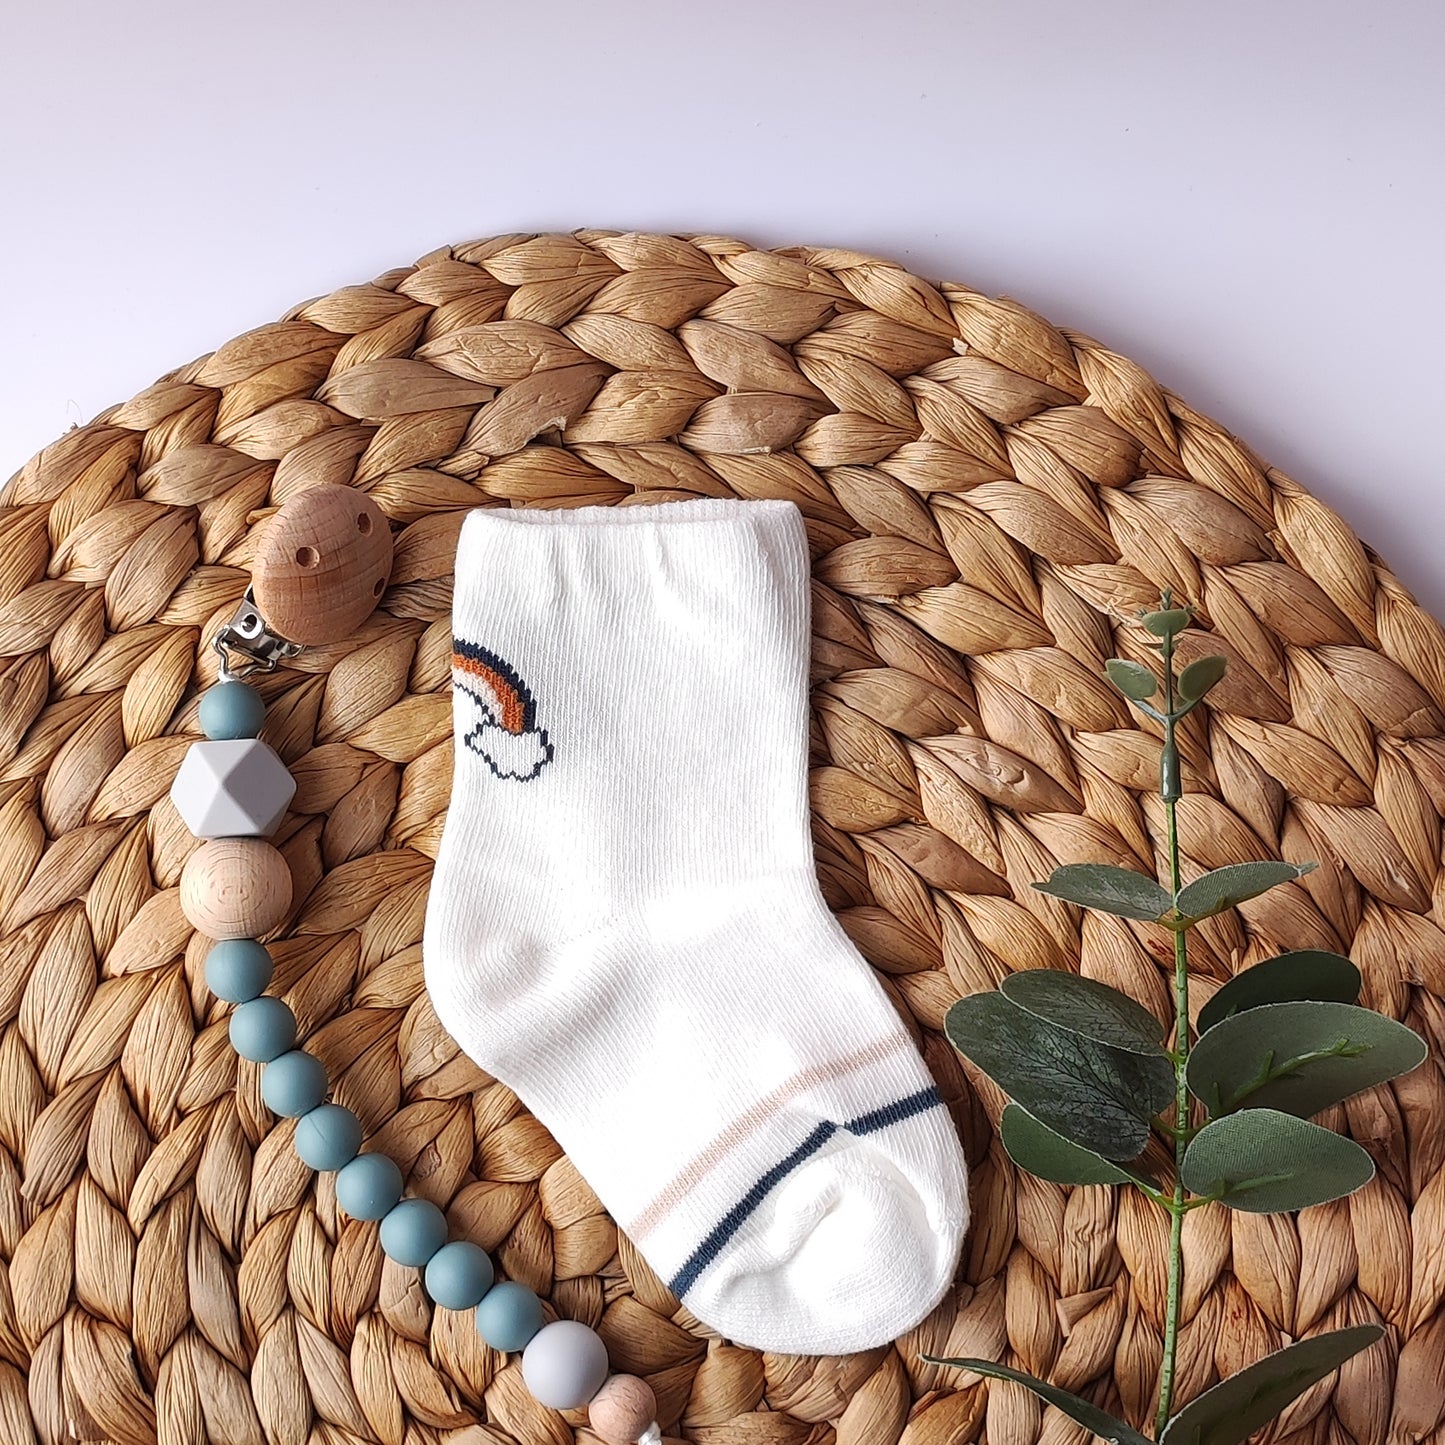 Baby cotton rich blue socks with print